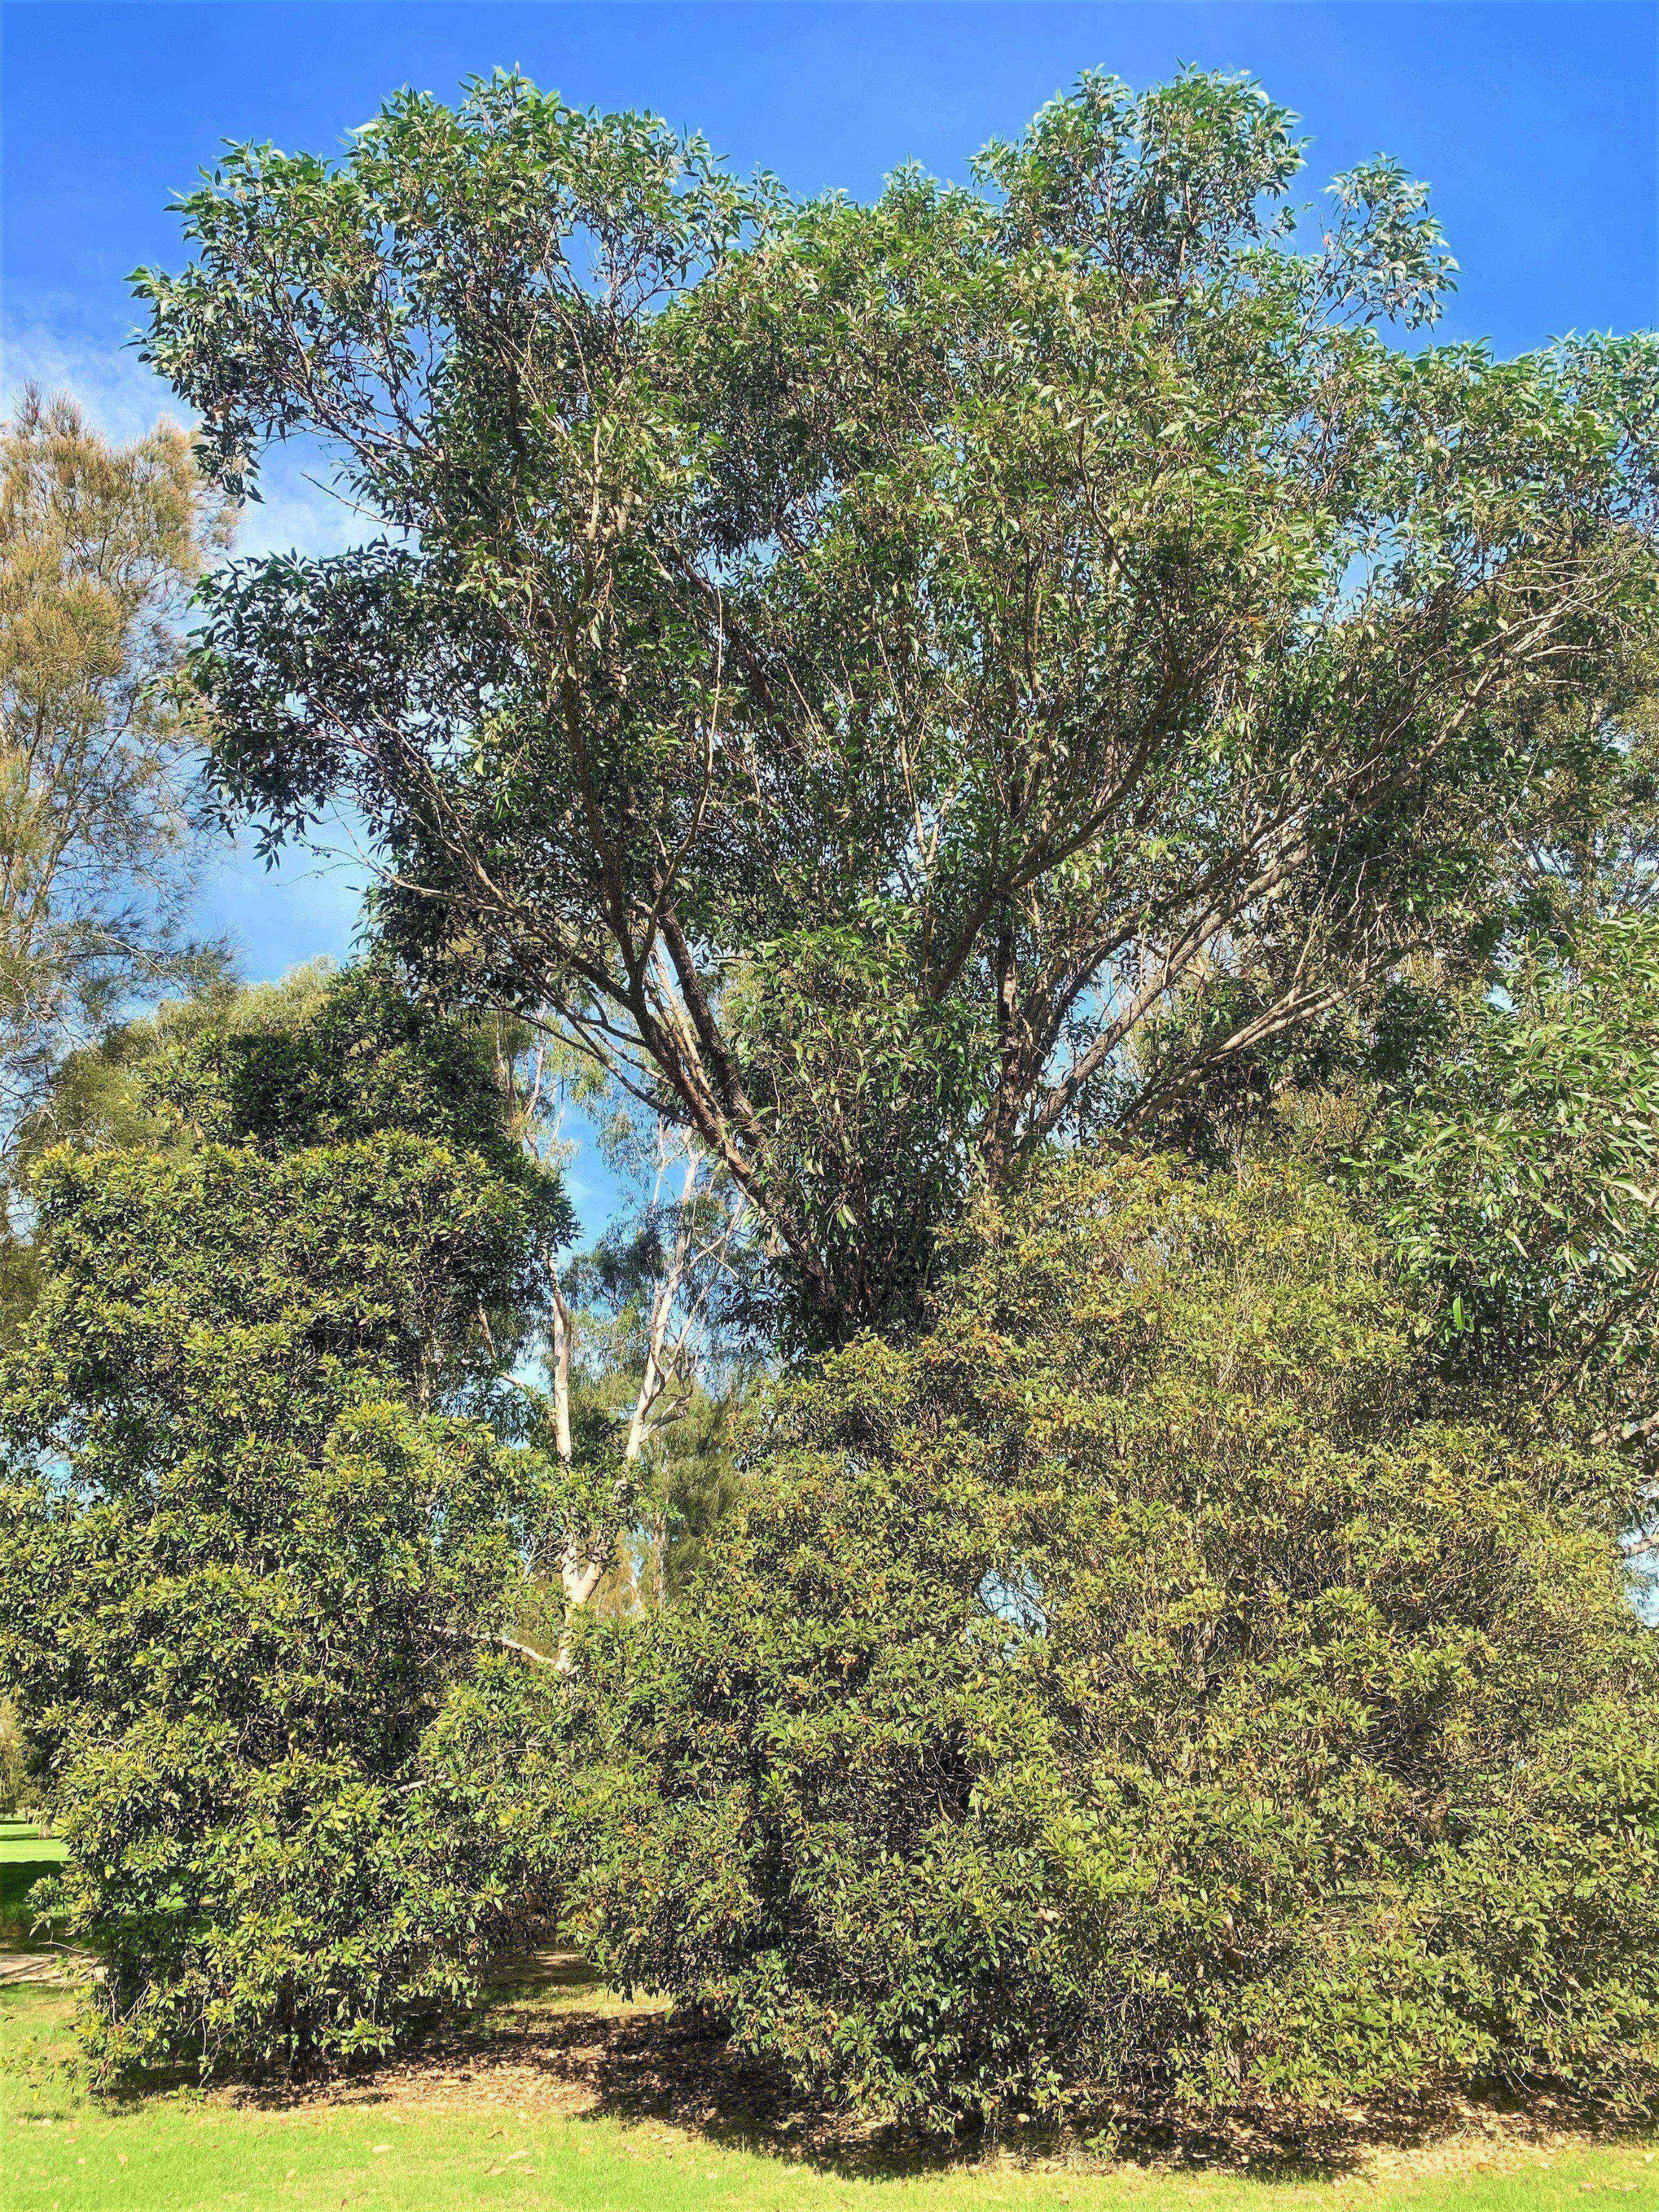 New Eurobodalla tree-clearing rules up for comment